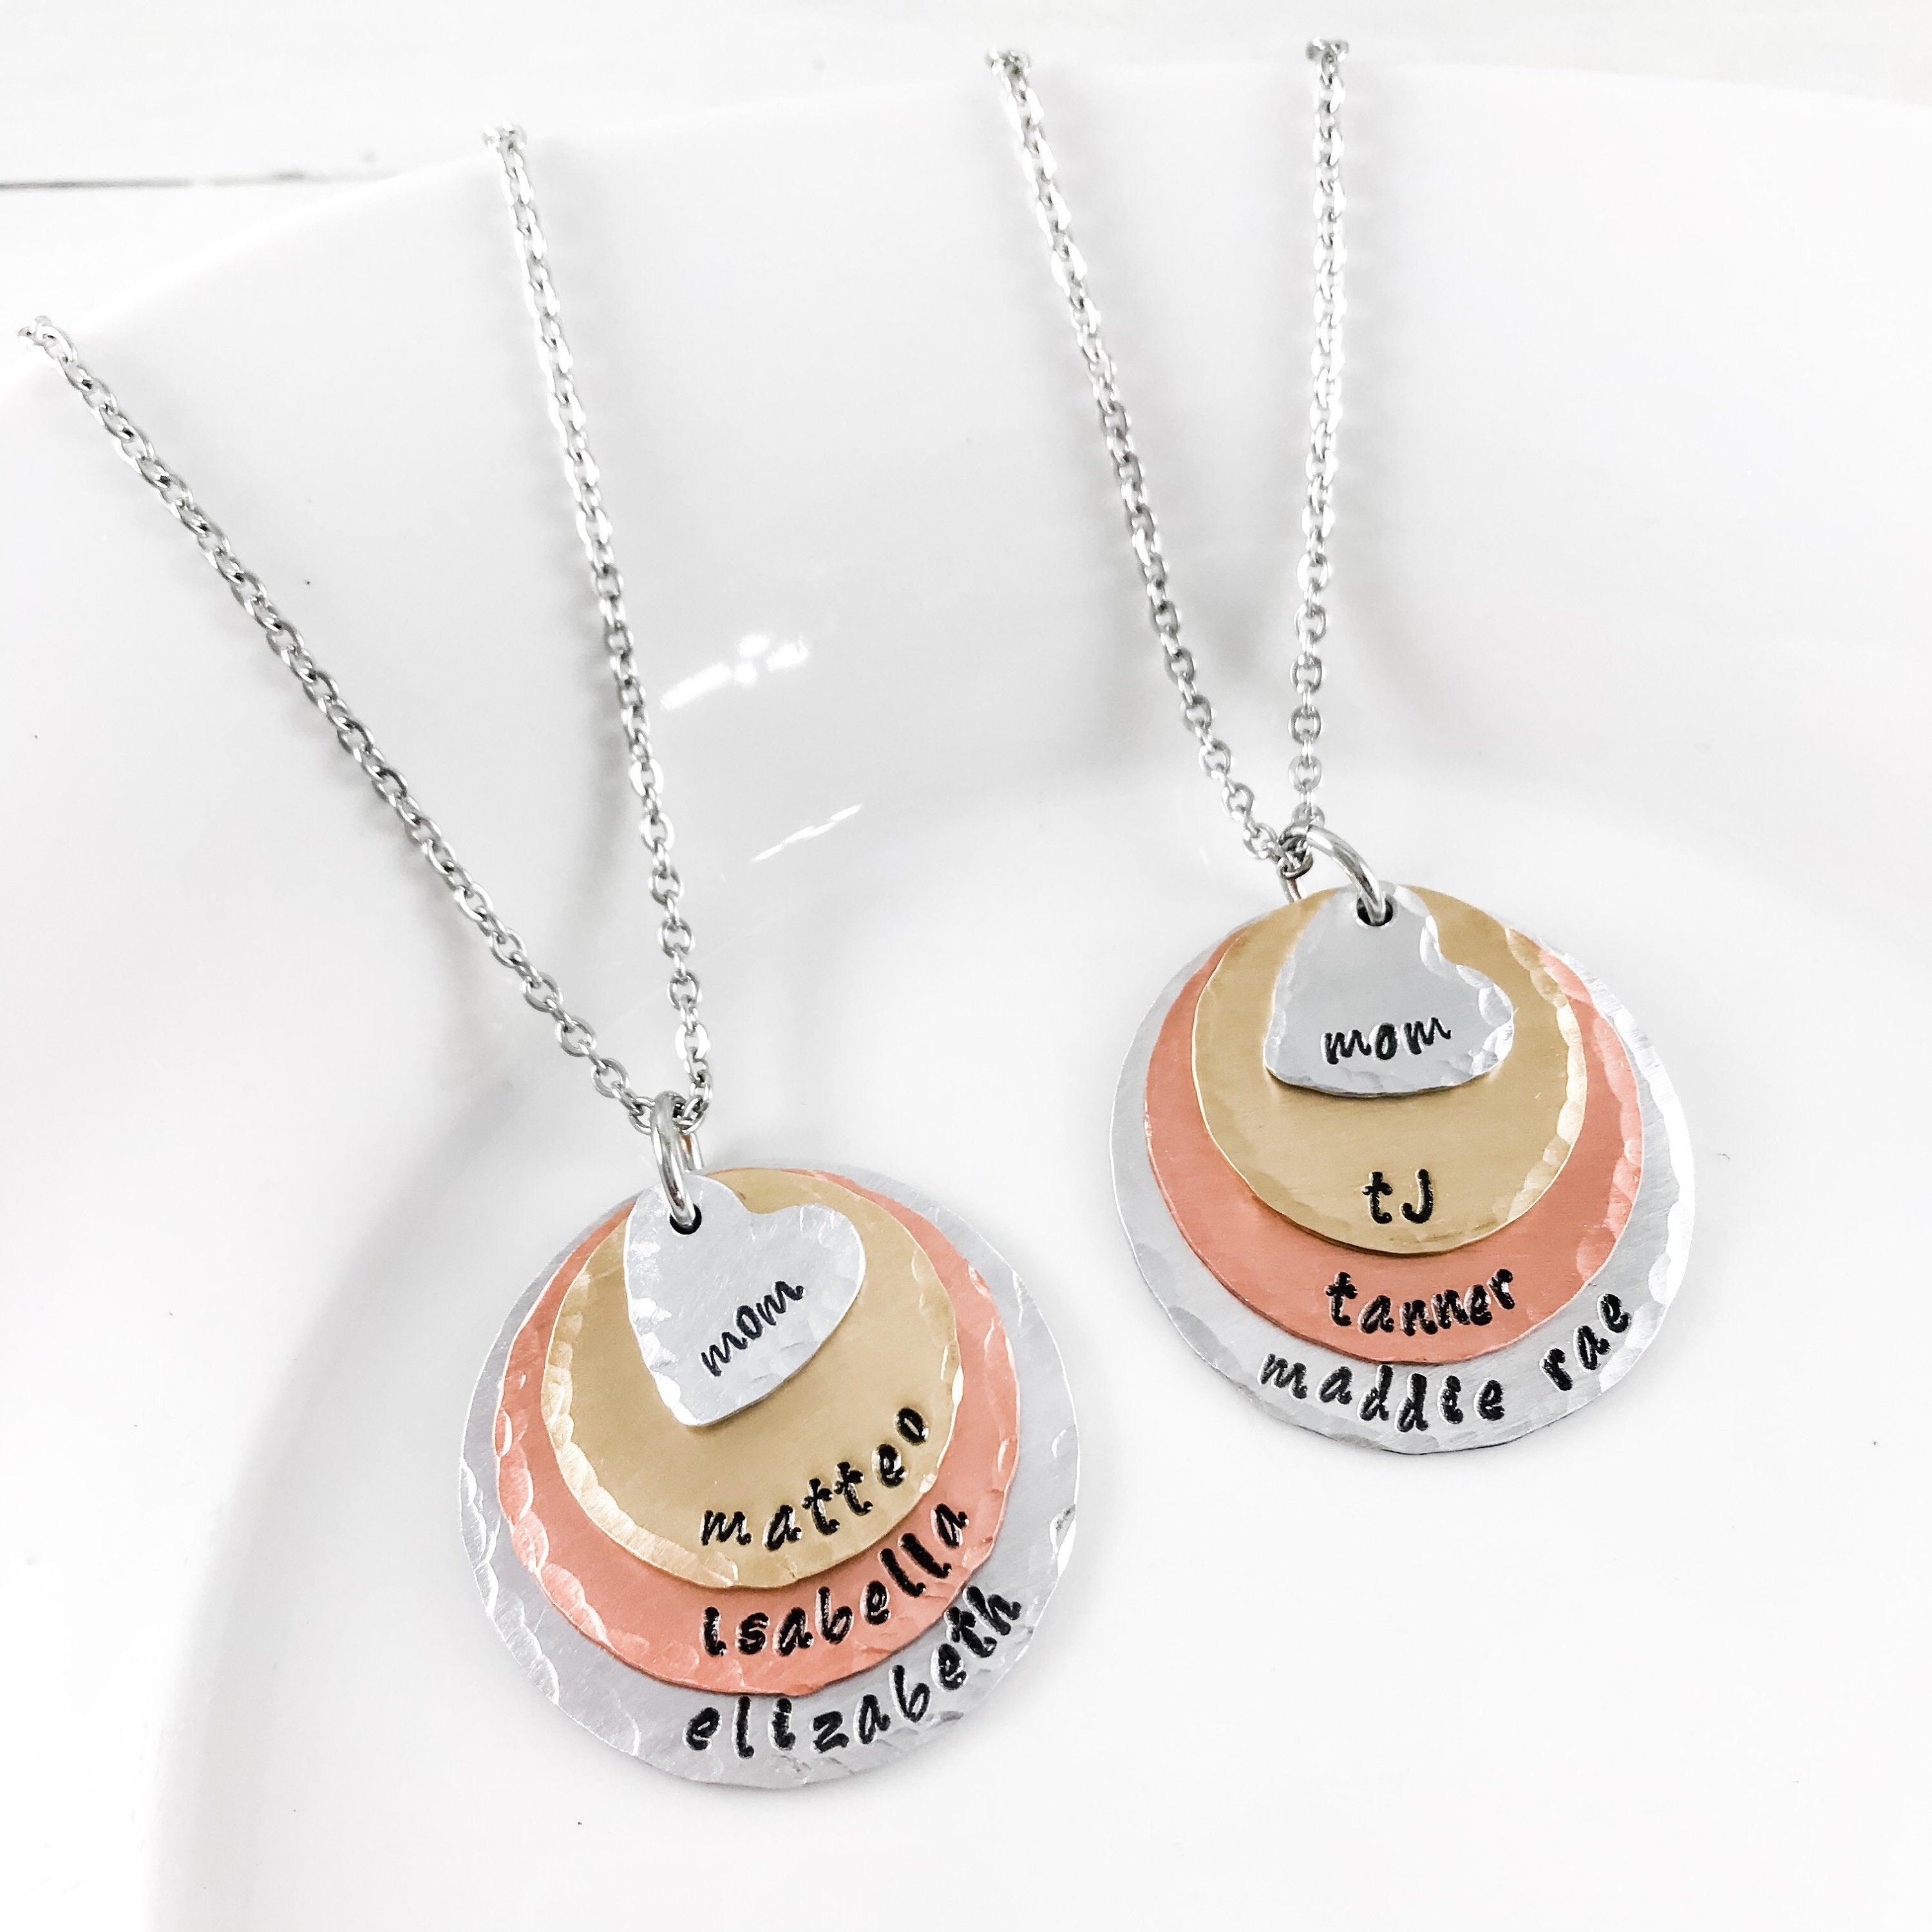 Dainty Custom Loved Ones Names Tag Necklace, Personalized Name Mini Tag  Necklace, Gift for Her, 925 Sterling Silver Necklace, N4S - Etsy | Custom  necklace, Sterling silver necklaces, Silver necklace